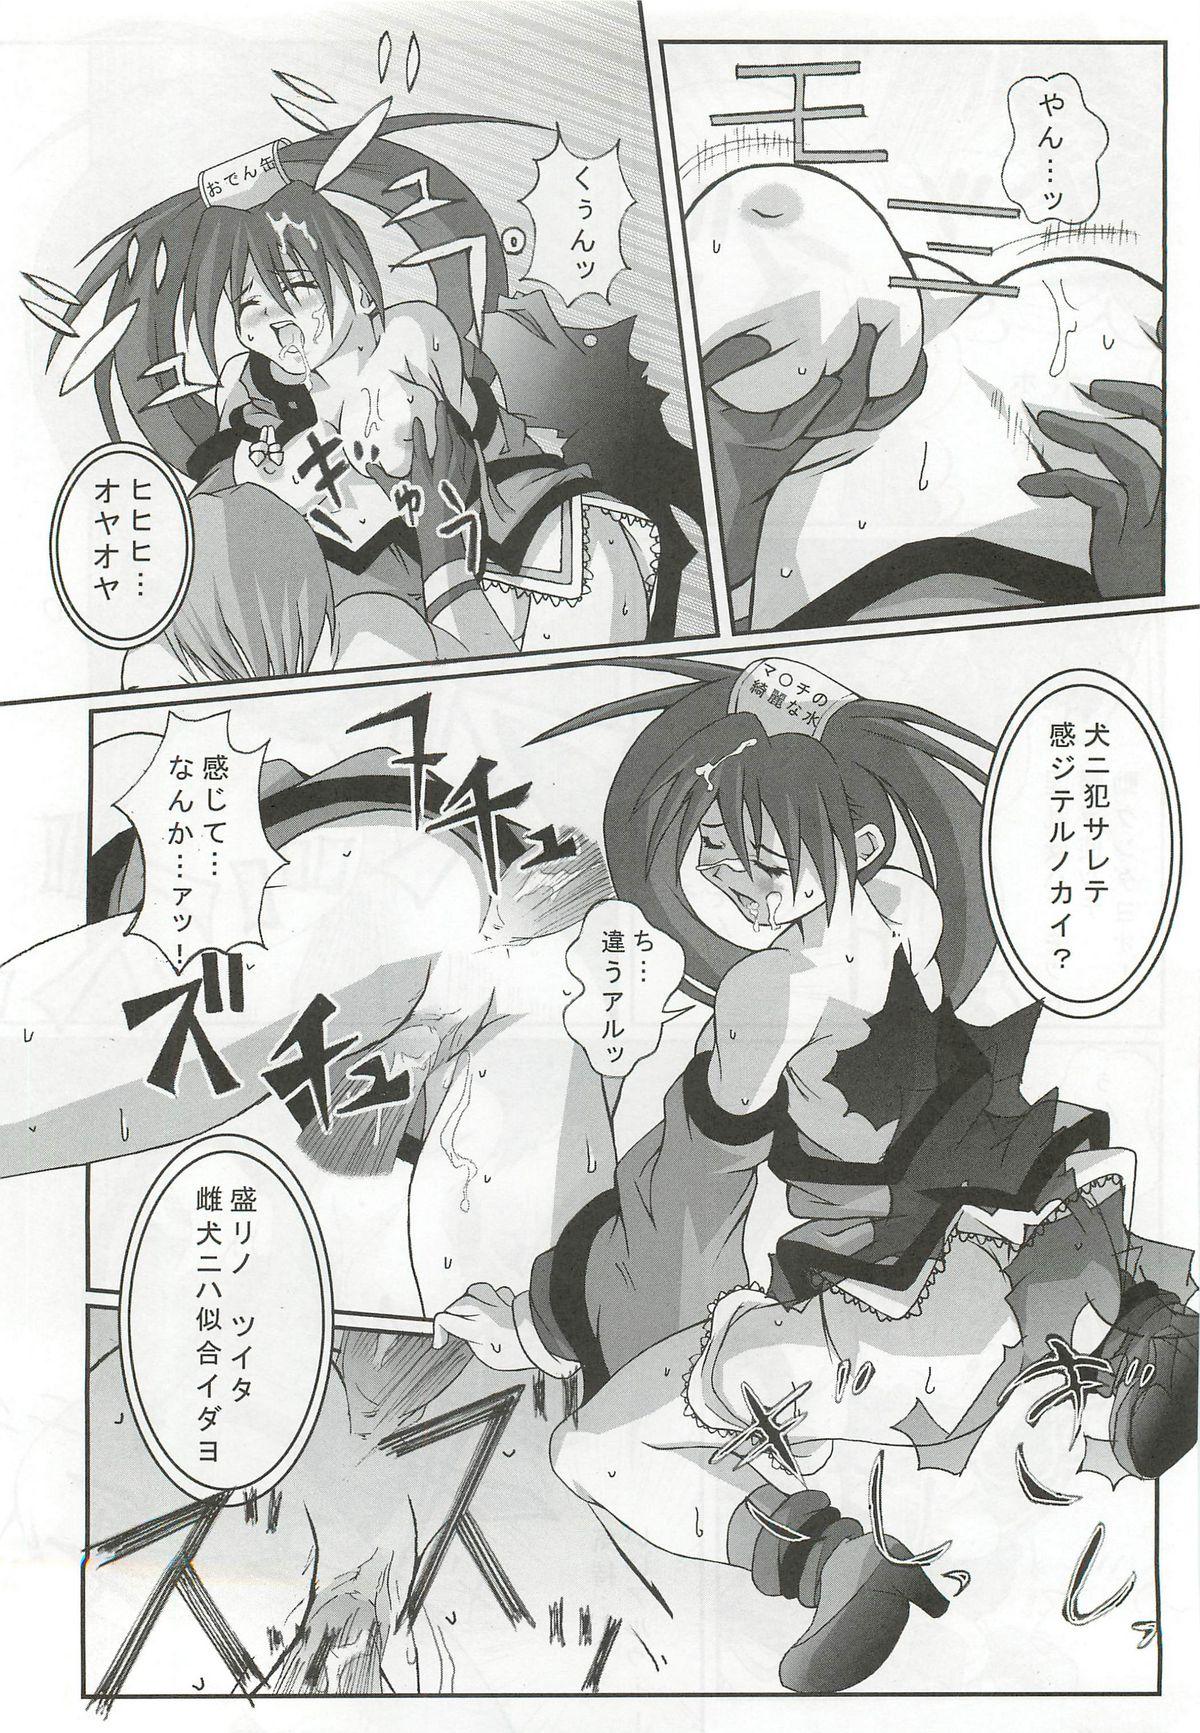 Russia Passionless 2 - Guilty gear Colegiala - Page 11